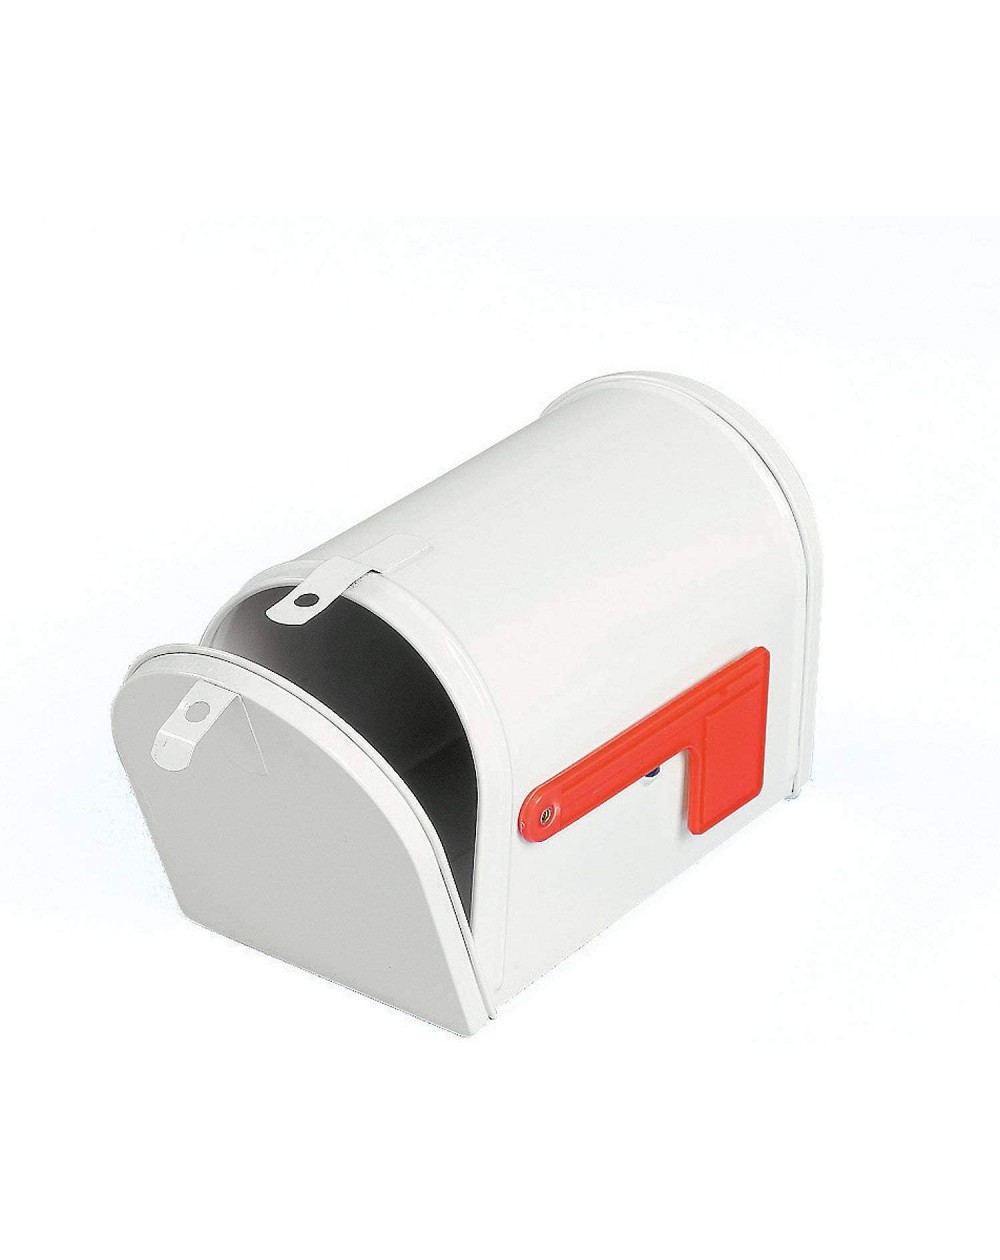 Favors White Tinplate Mailbox Toy - Great for Kids Crafts and Decorating Activities - CE117WGU7L9 $17.56